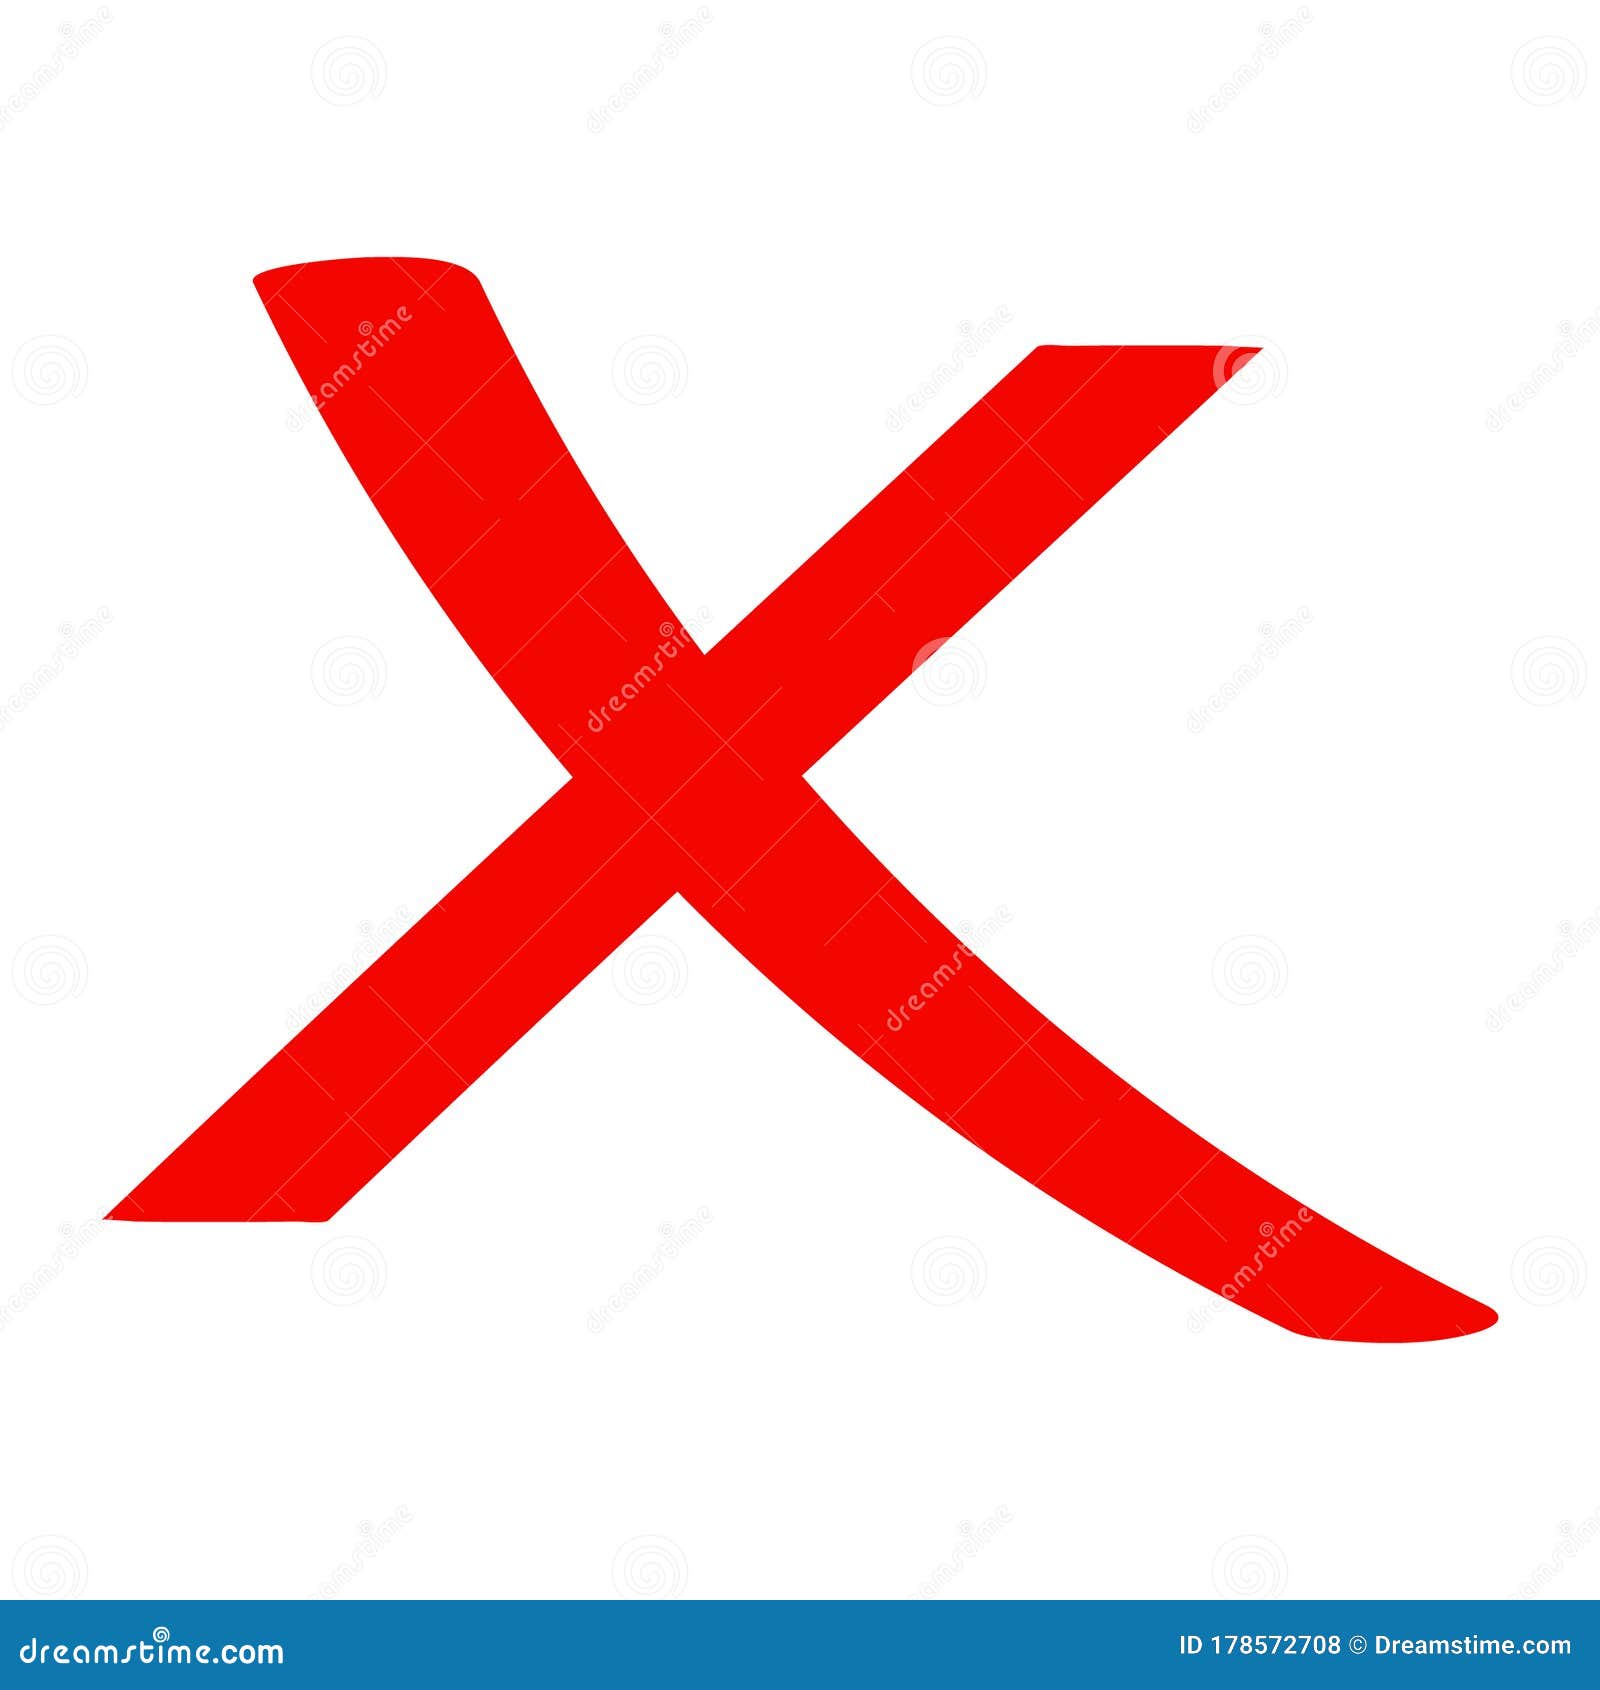 Check Mark Icon . Red Cross Flat Simbol X. Delete Icon Vector Illustration.  Eps 10 Stock Vector - Illustration of poll, assignment: 178572708